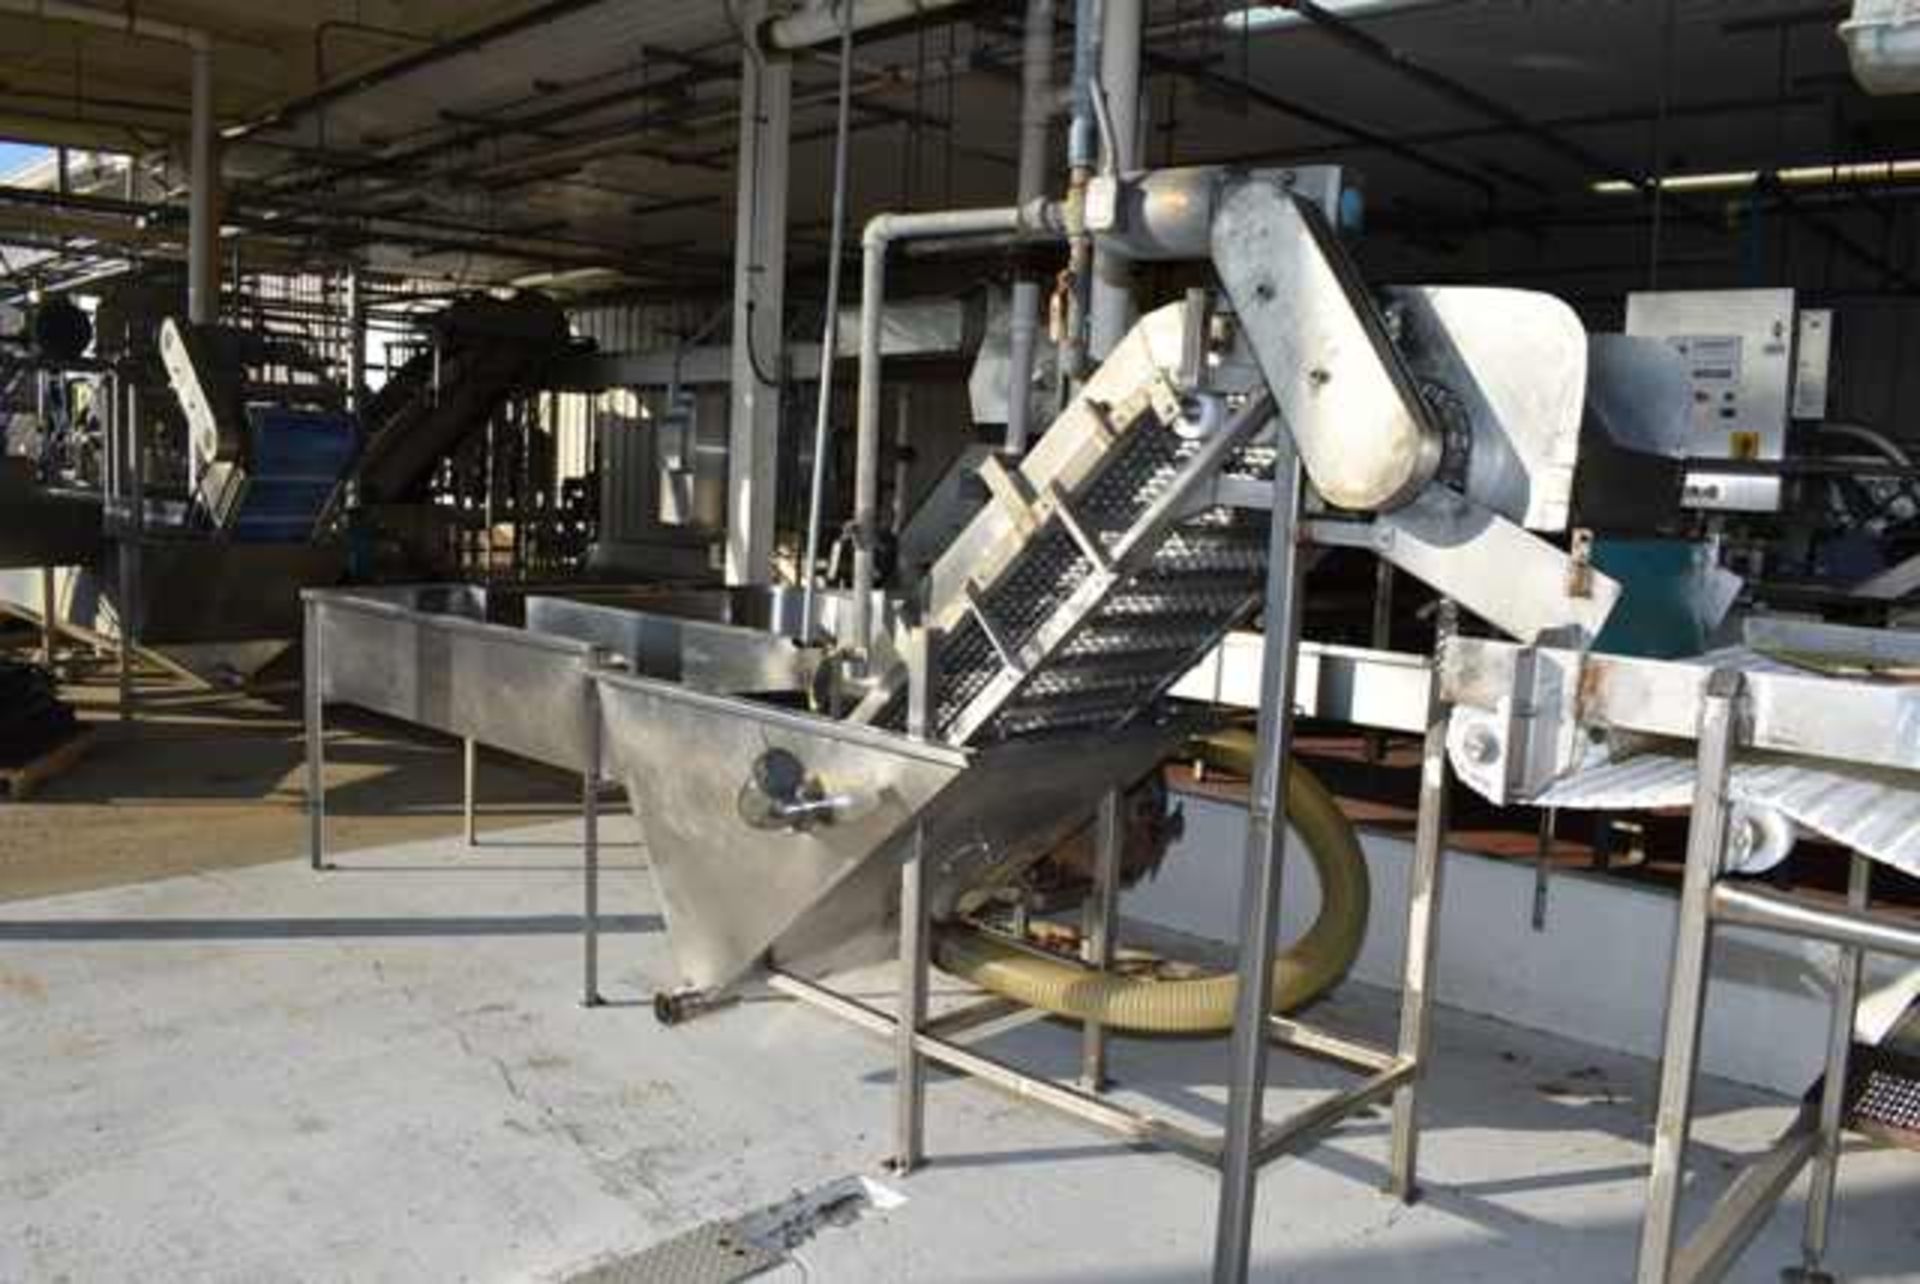 Custom Designed and Fabricated Stainless Steel Flume to Chopper, Equipped with 24"W x S'L Incline - Image 3 of 3